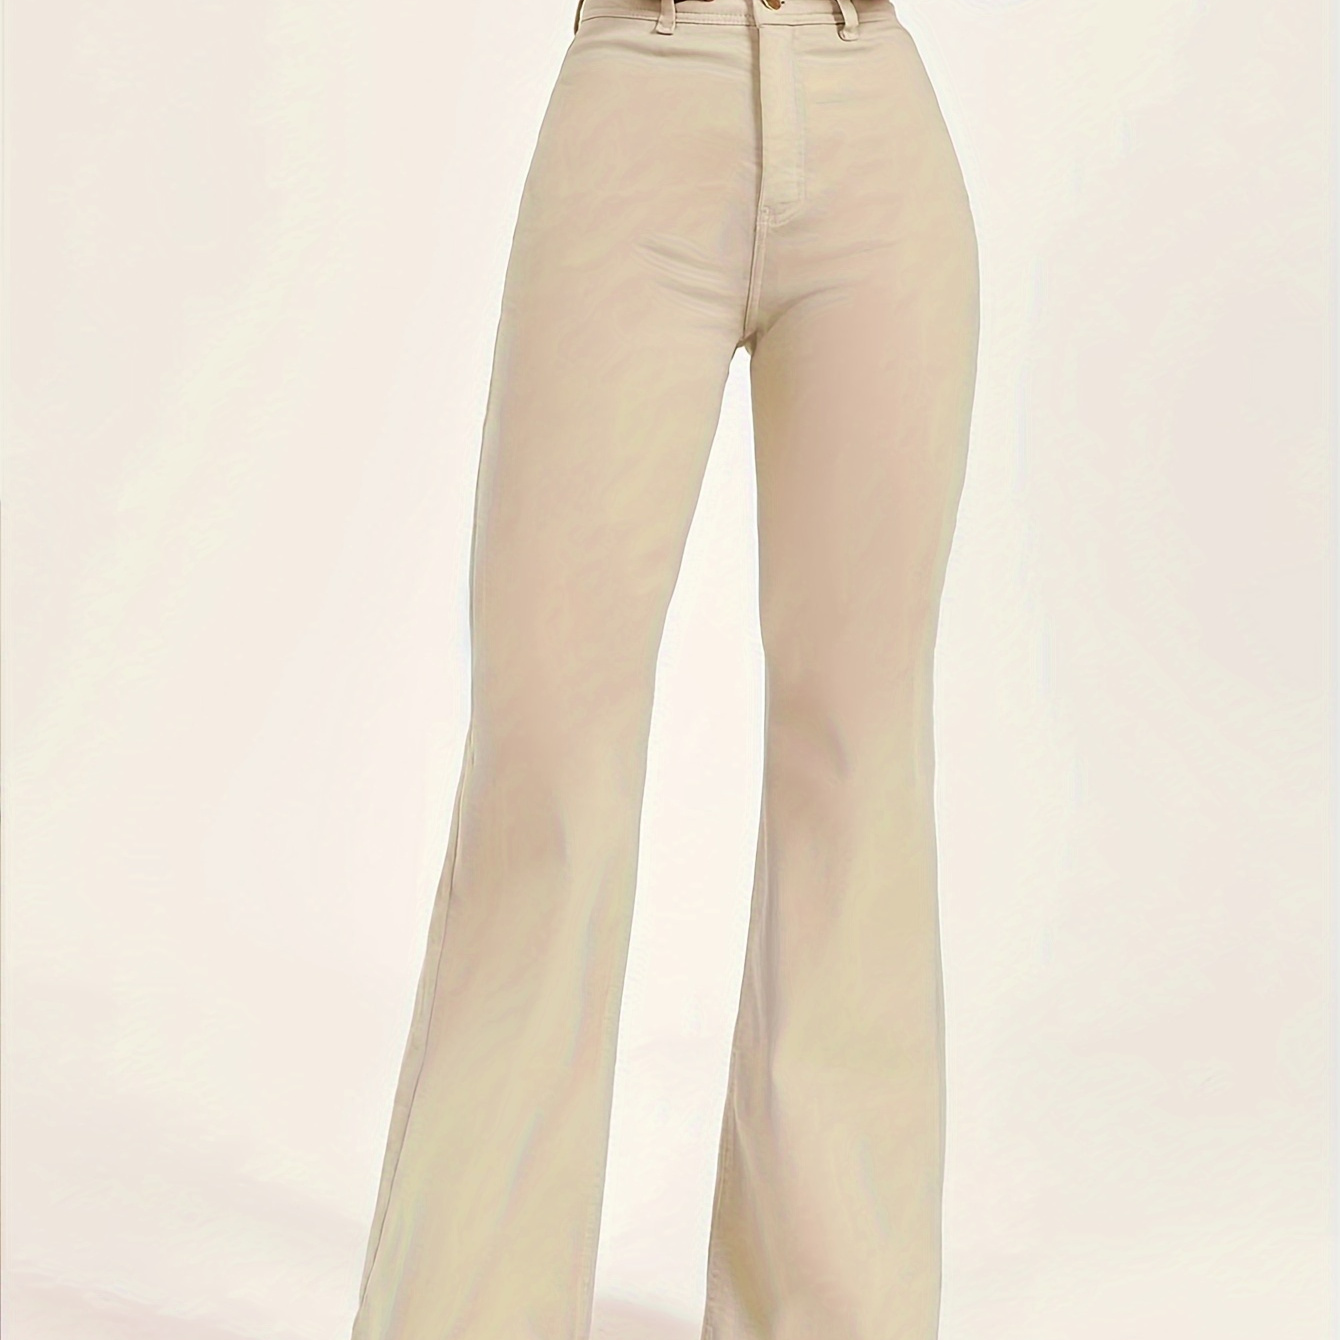 

High Rise High Waist Nude Color Slim Fit Wide Legs High Stretchy Solid Plain Color Flare Jeans, Women's Denim Jeans